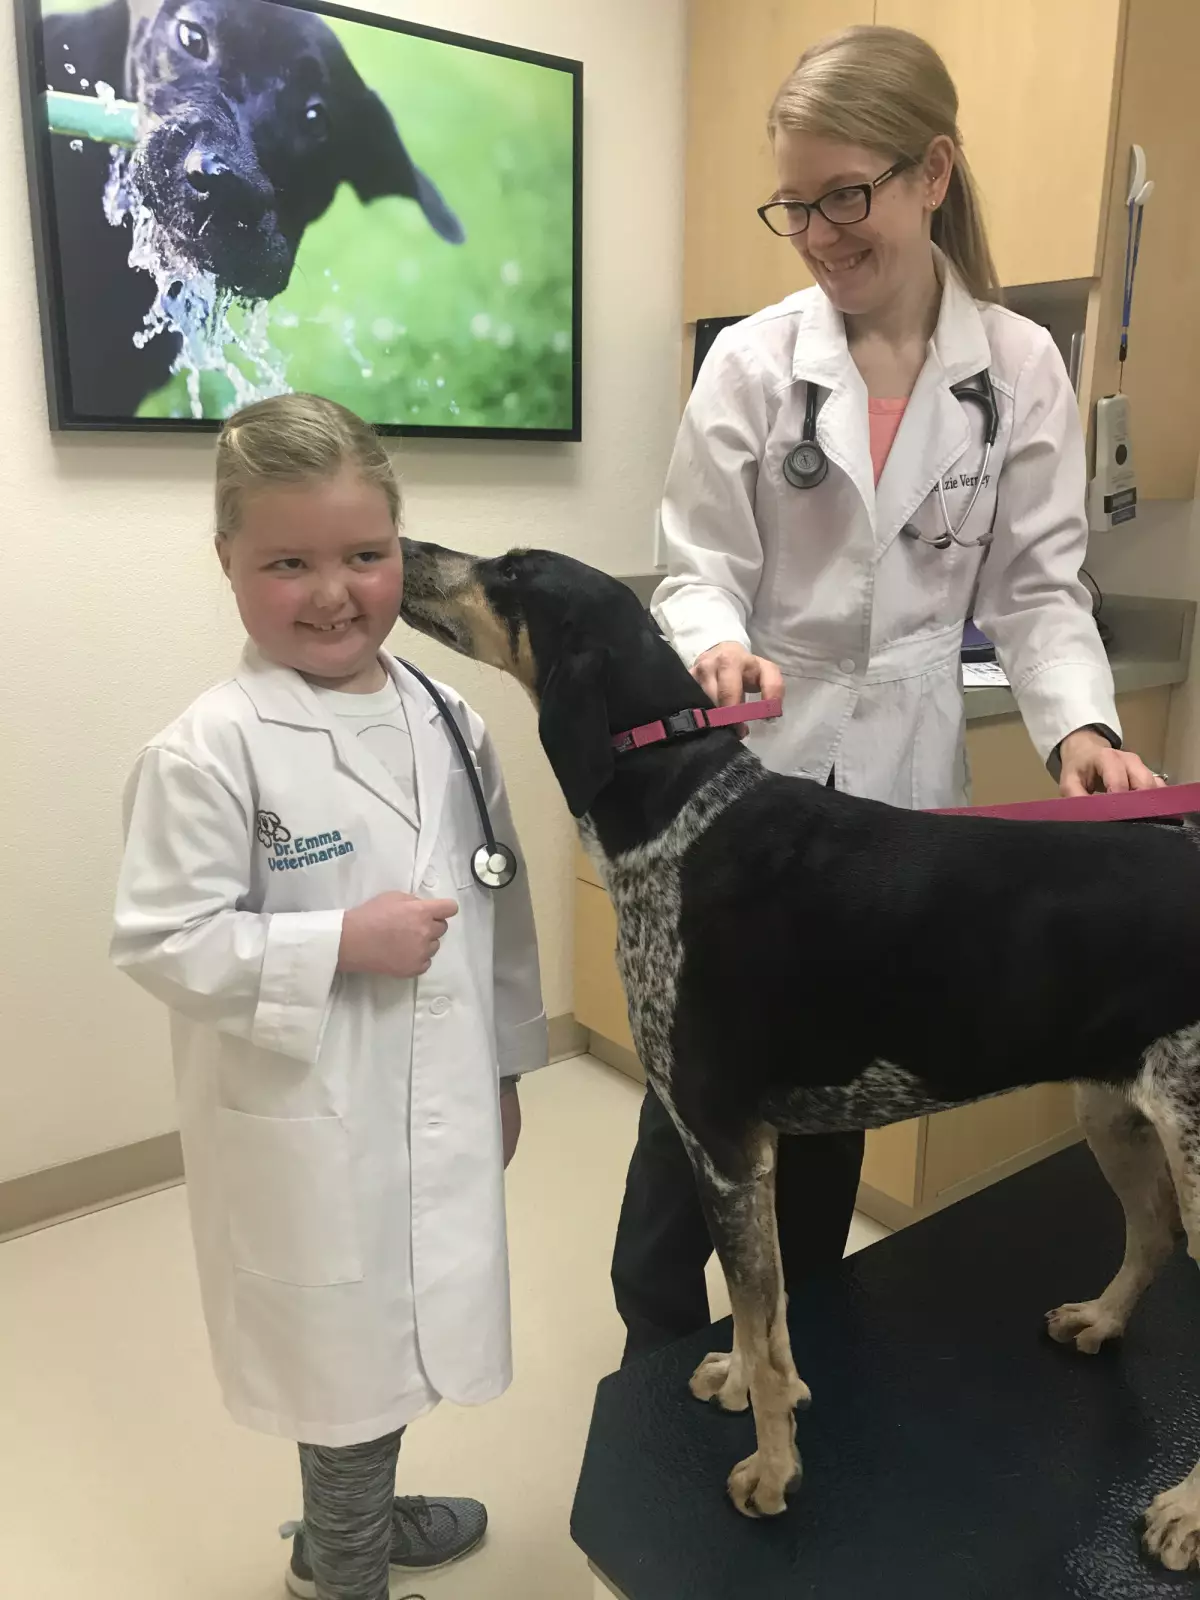 Emma spent a day as a guest veterinarian.